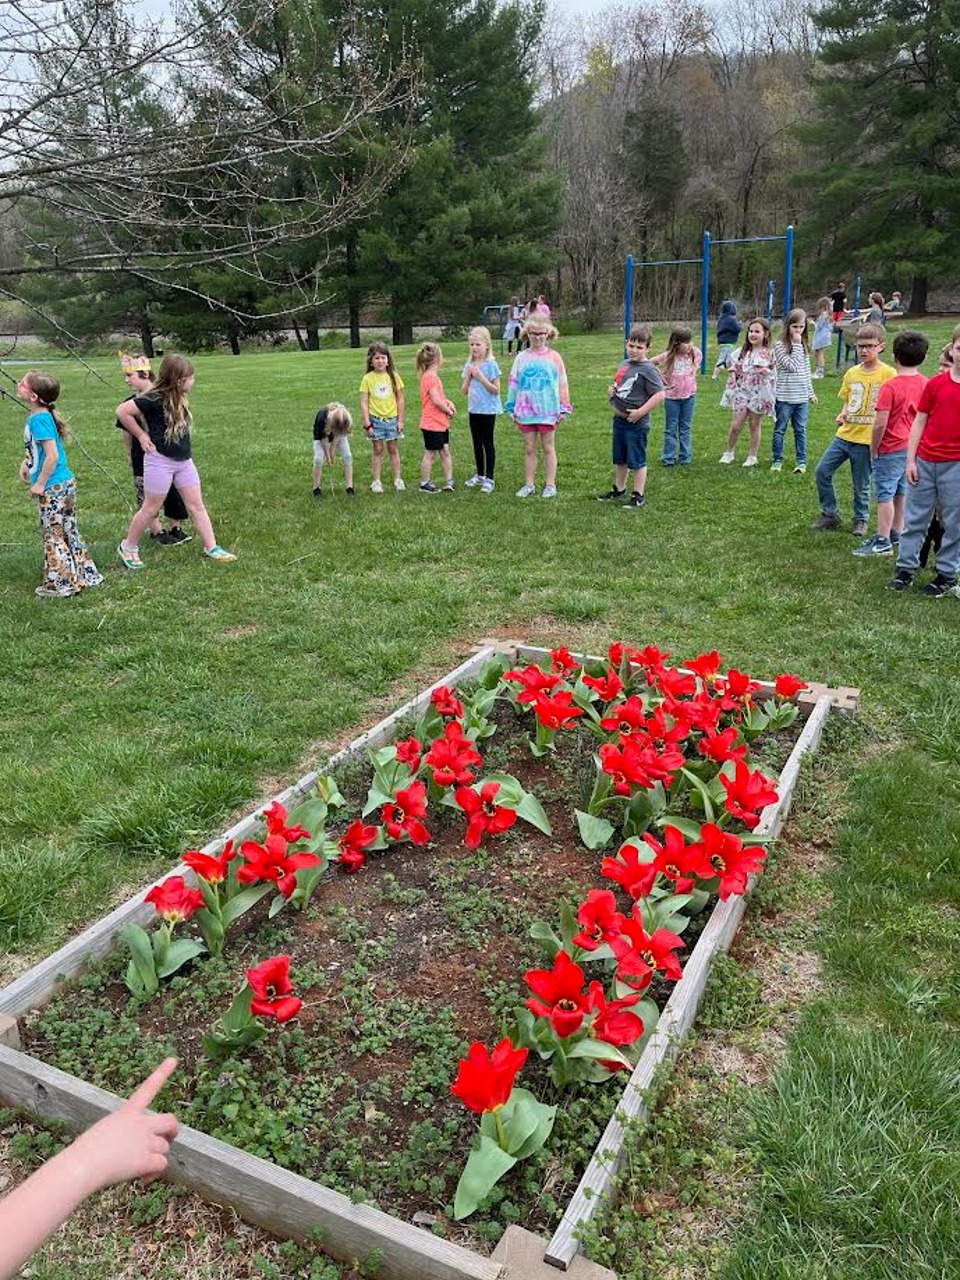 A flower garden of red tulips with children looking on